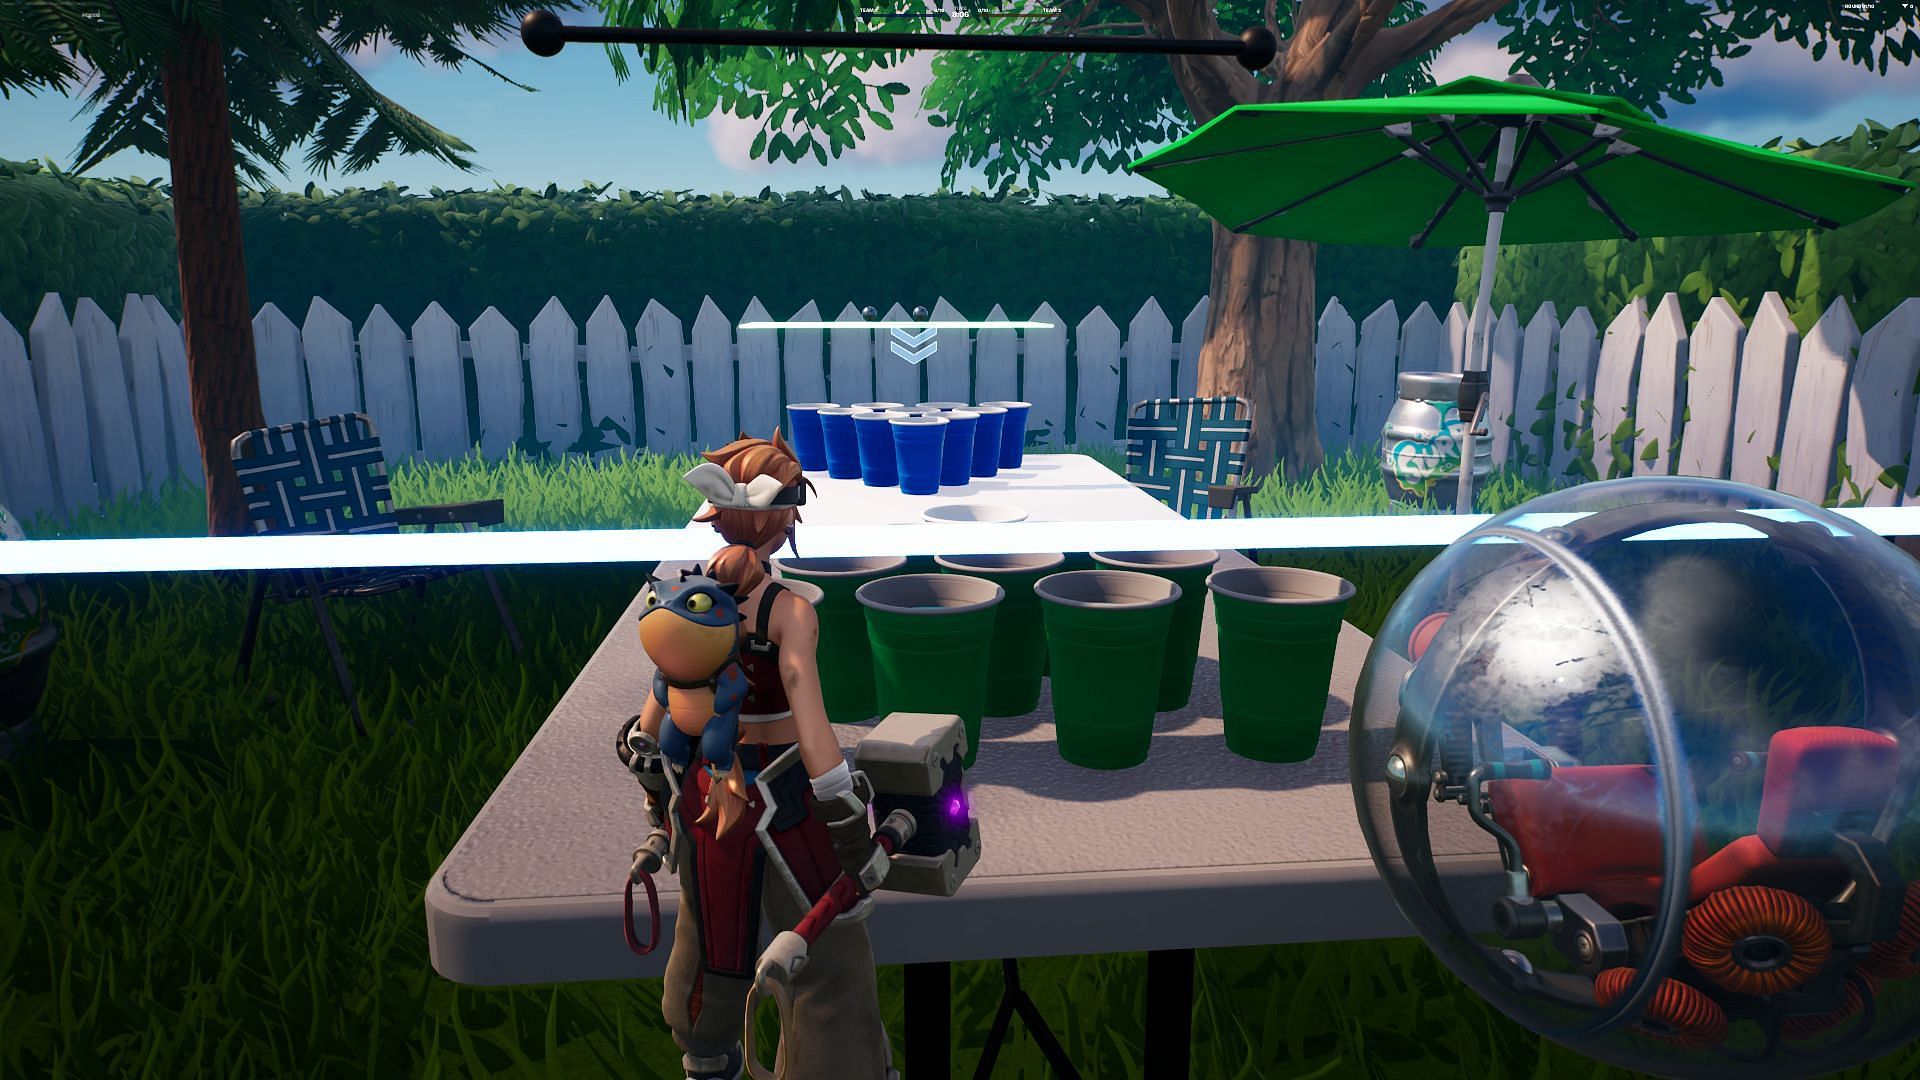 Slurp Pong is probably one of the most amusing Fortnite Creative games ever made! (Image via Epic Games/Fortnite)